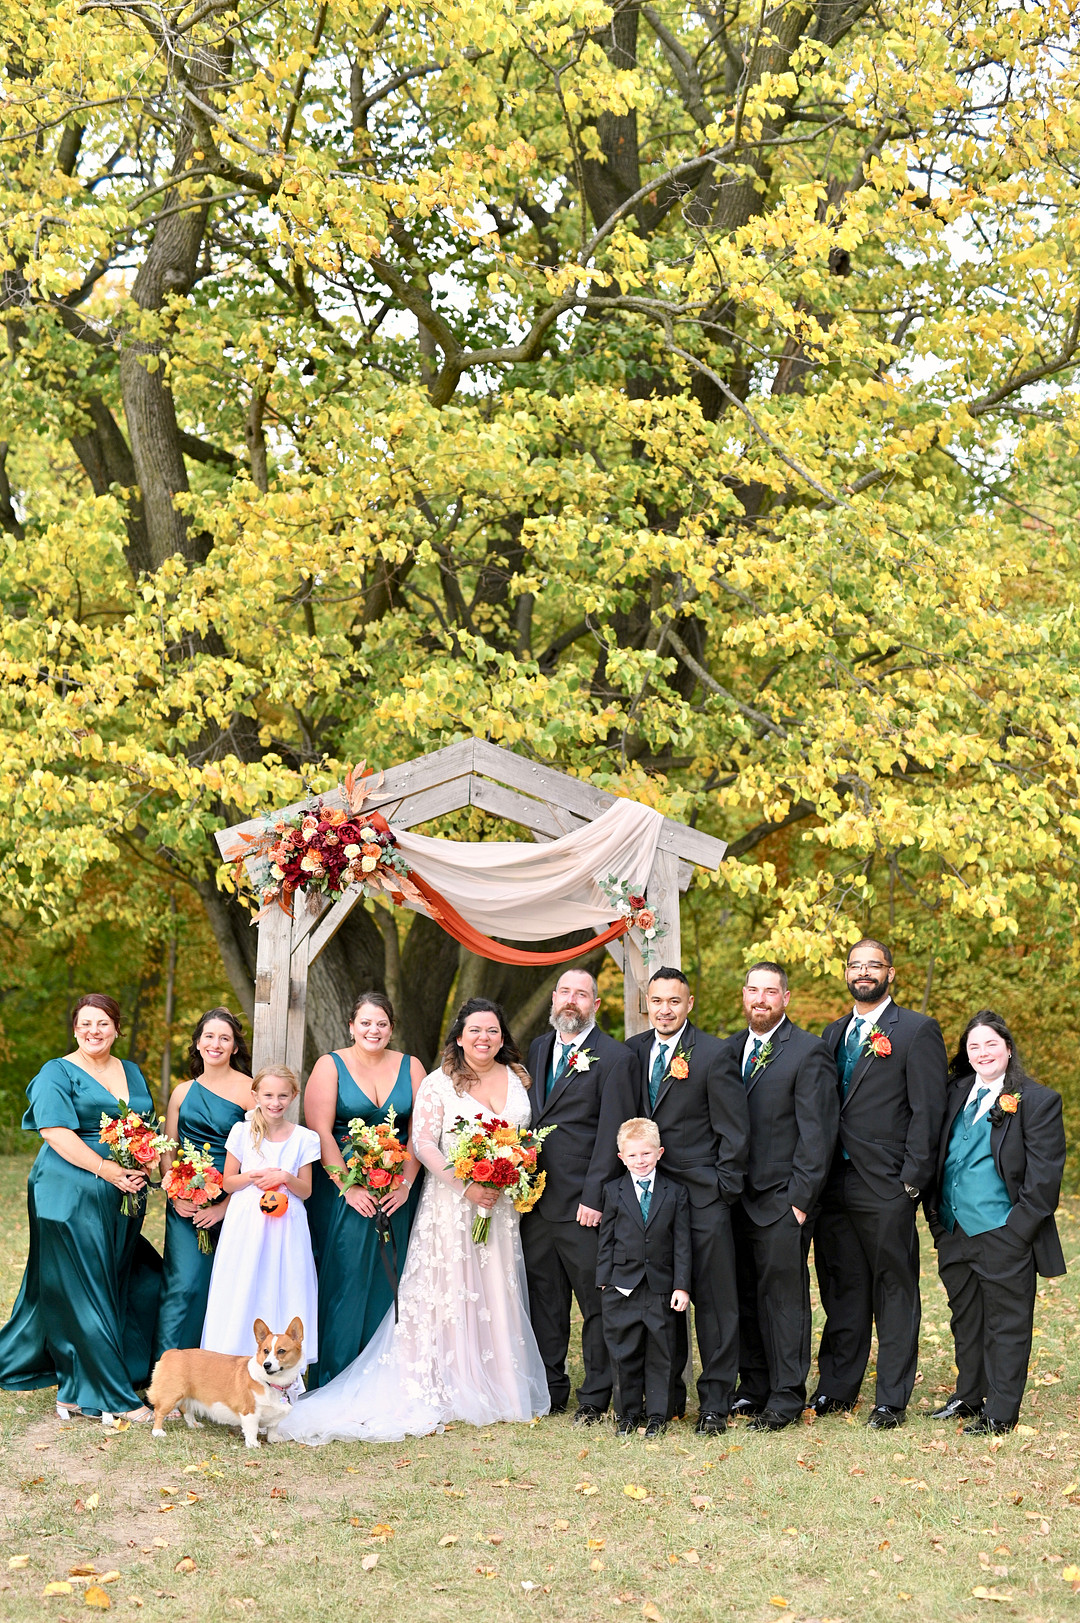 Halloween Themed Wedding At An Orchard 75